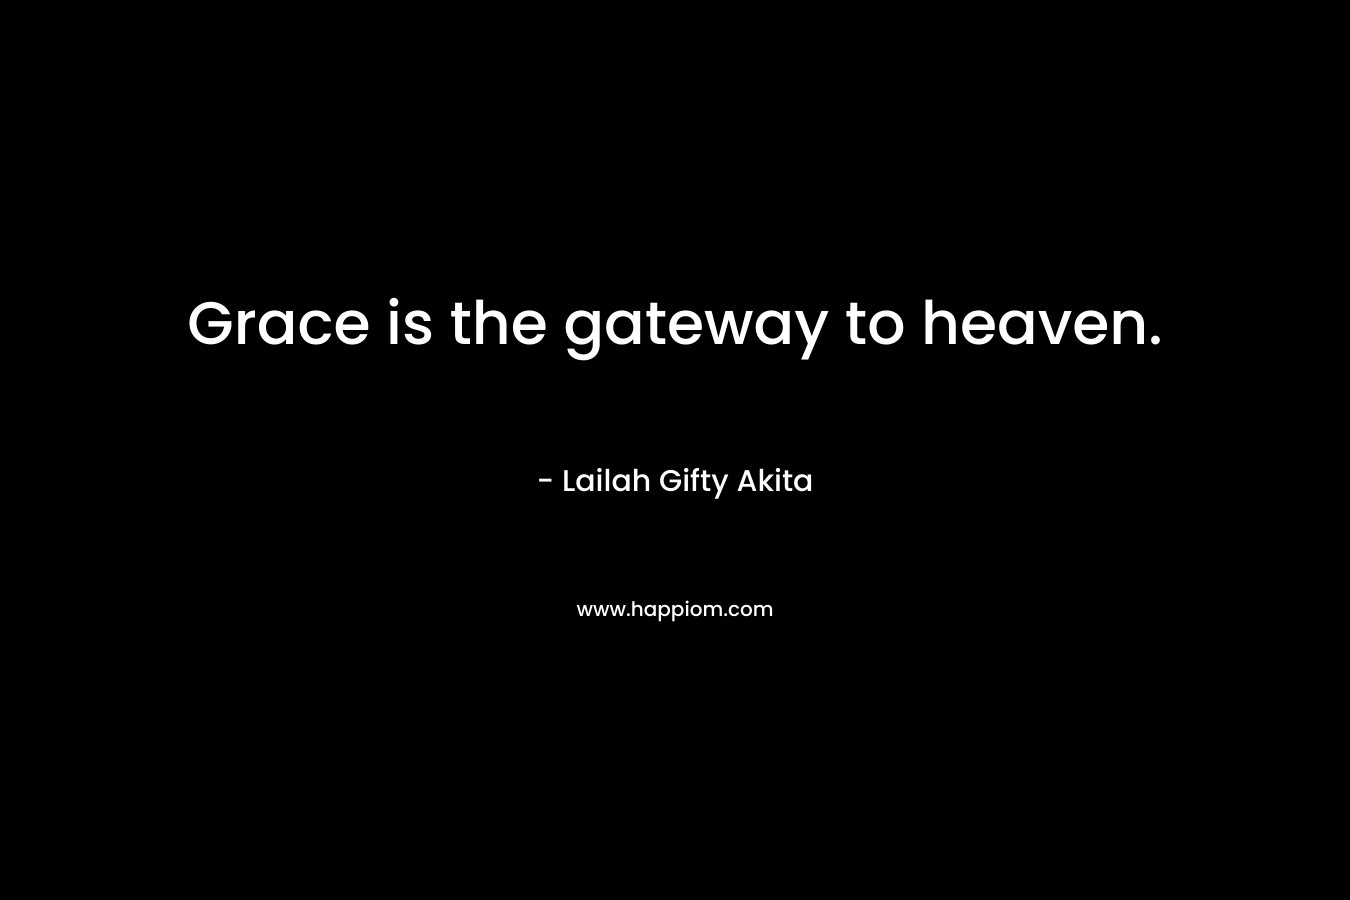 Grace is the gateway to heaven. – Lailah Gifty Akita